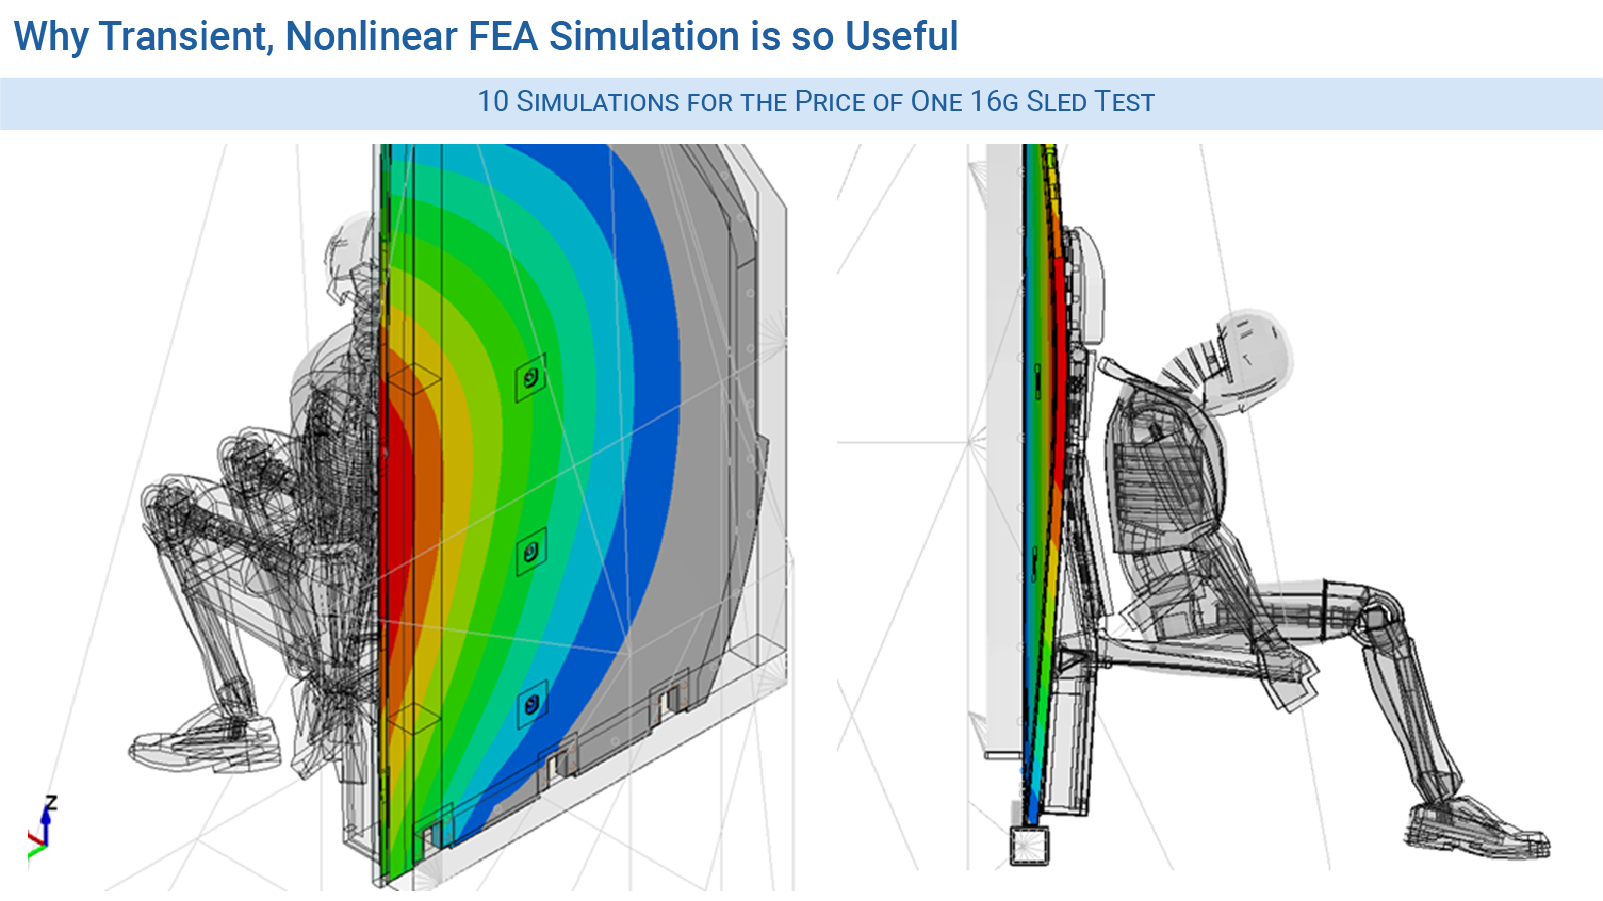 Nonlinear FEA Consulting Services - Why Simulation Makes Money